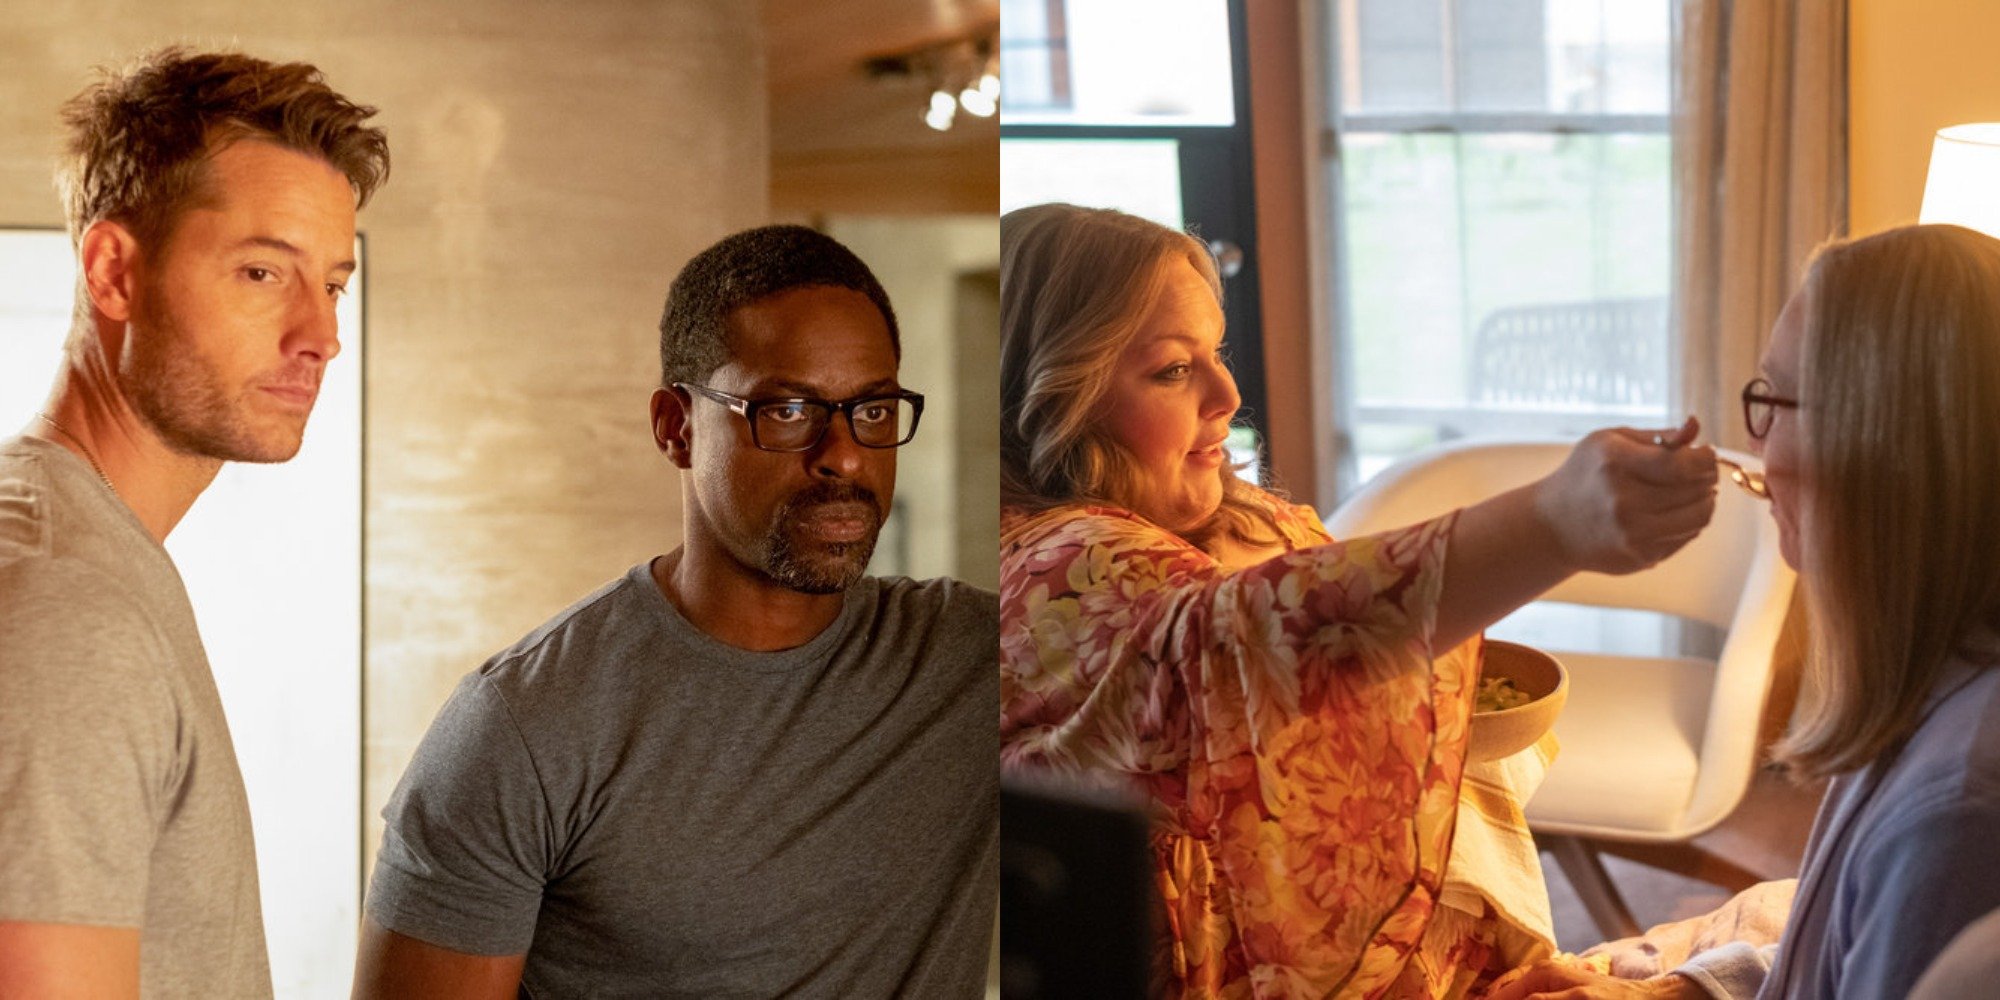 The 'This Is Us' cast includes Justin Hartley, Sterling K. Brown, Chrissy Metz, and Mandy Moore.